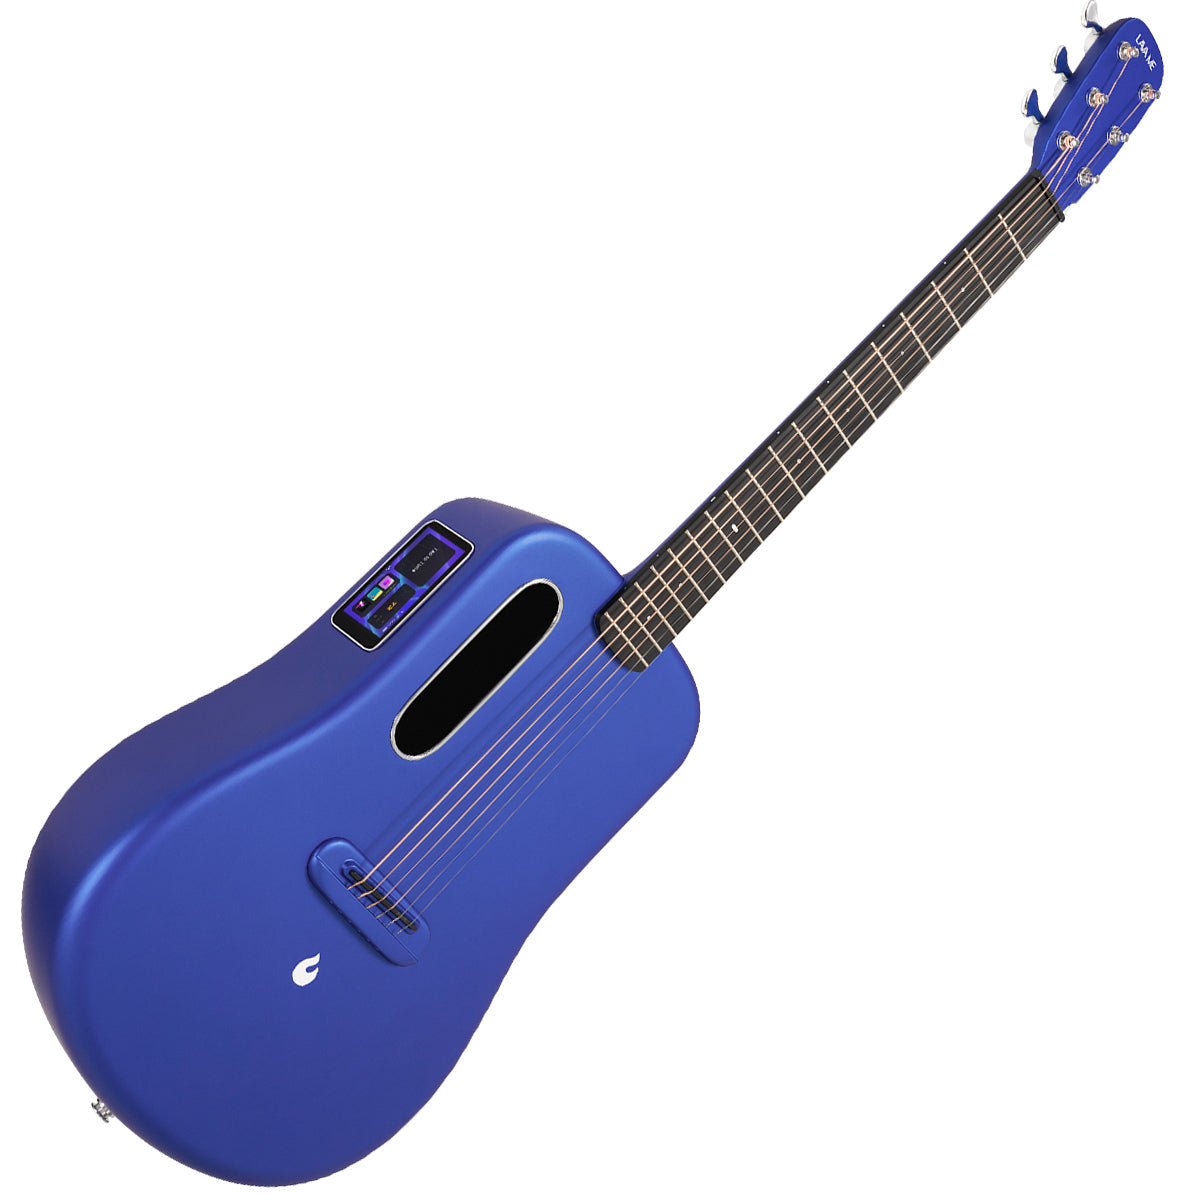 LAVA ME 3 38" with Space Bag ~ Blue, Acoustic Guitar for sale at Richards Guitars.